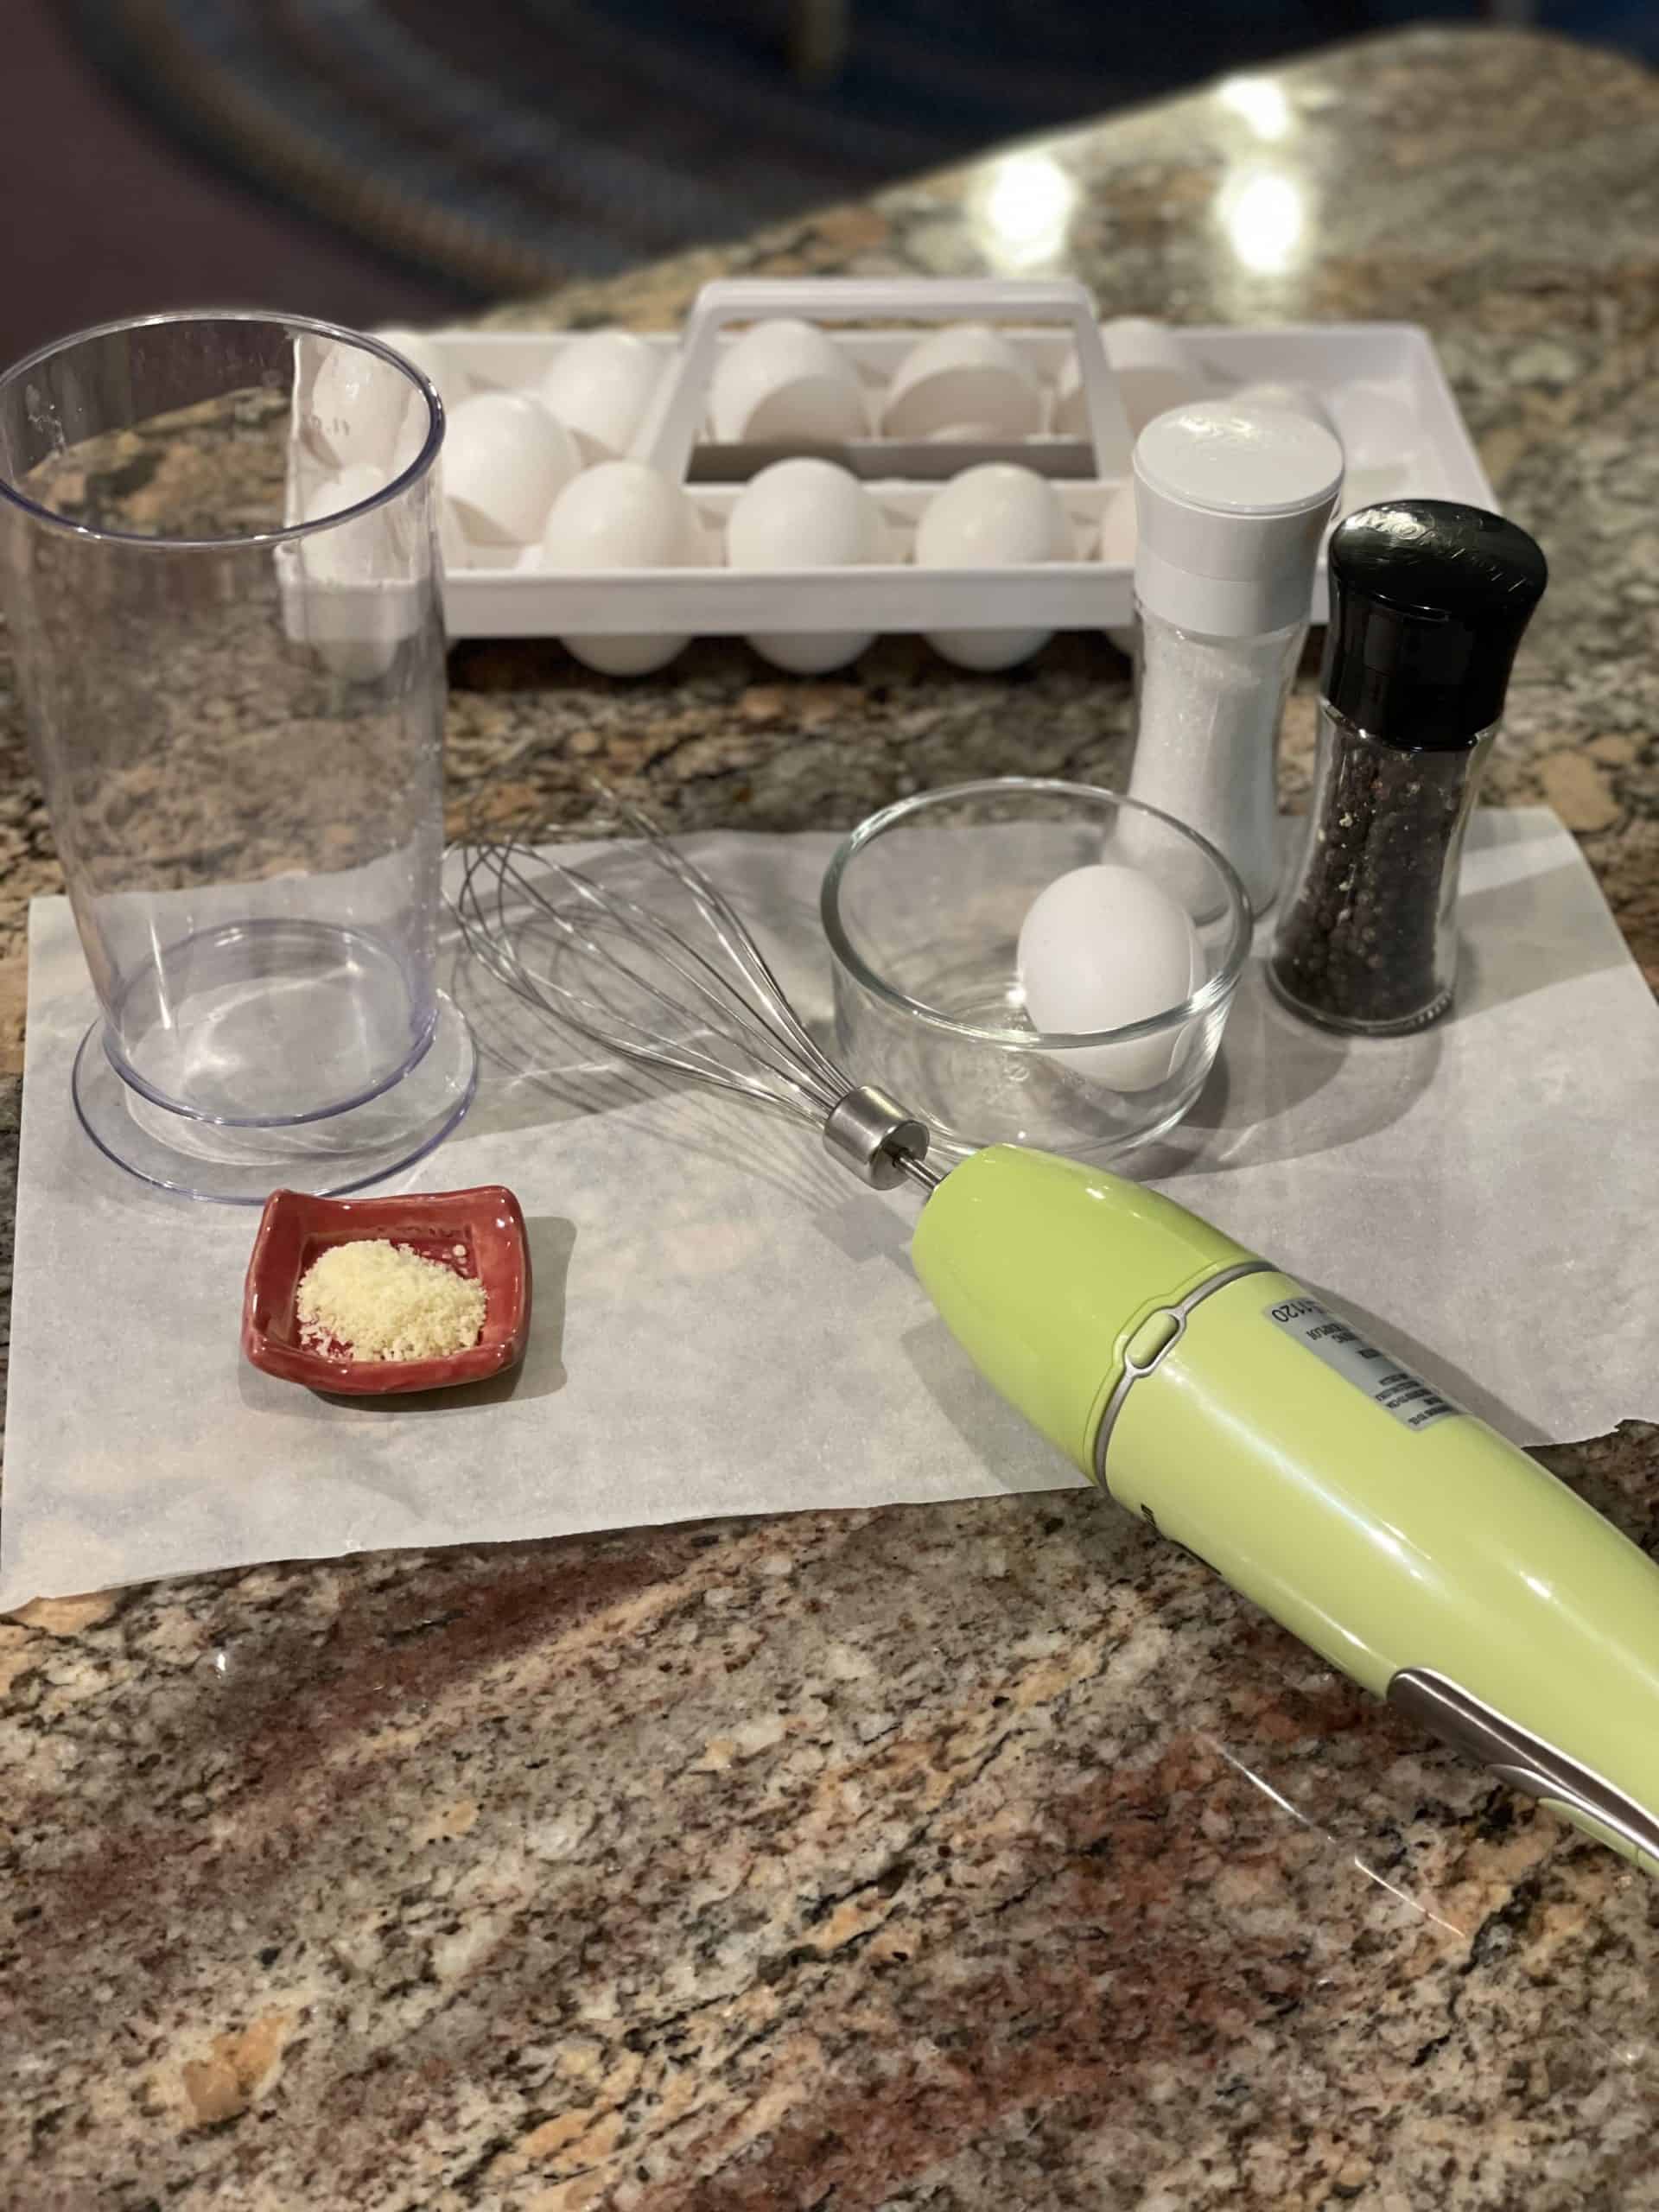 Cloud Egg Ingredients - Eggs, Parmesan Cheese, Salt and Pepper along with a hand mixer.